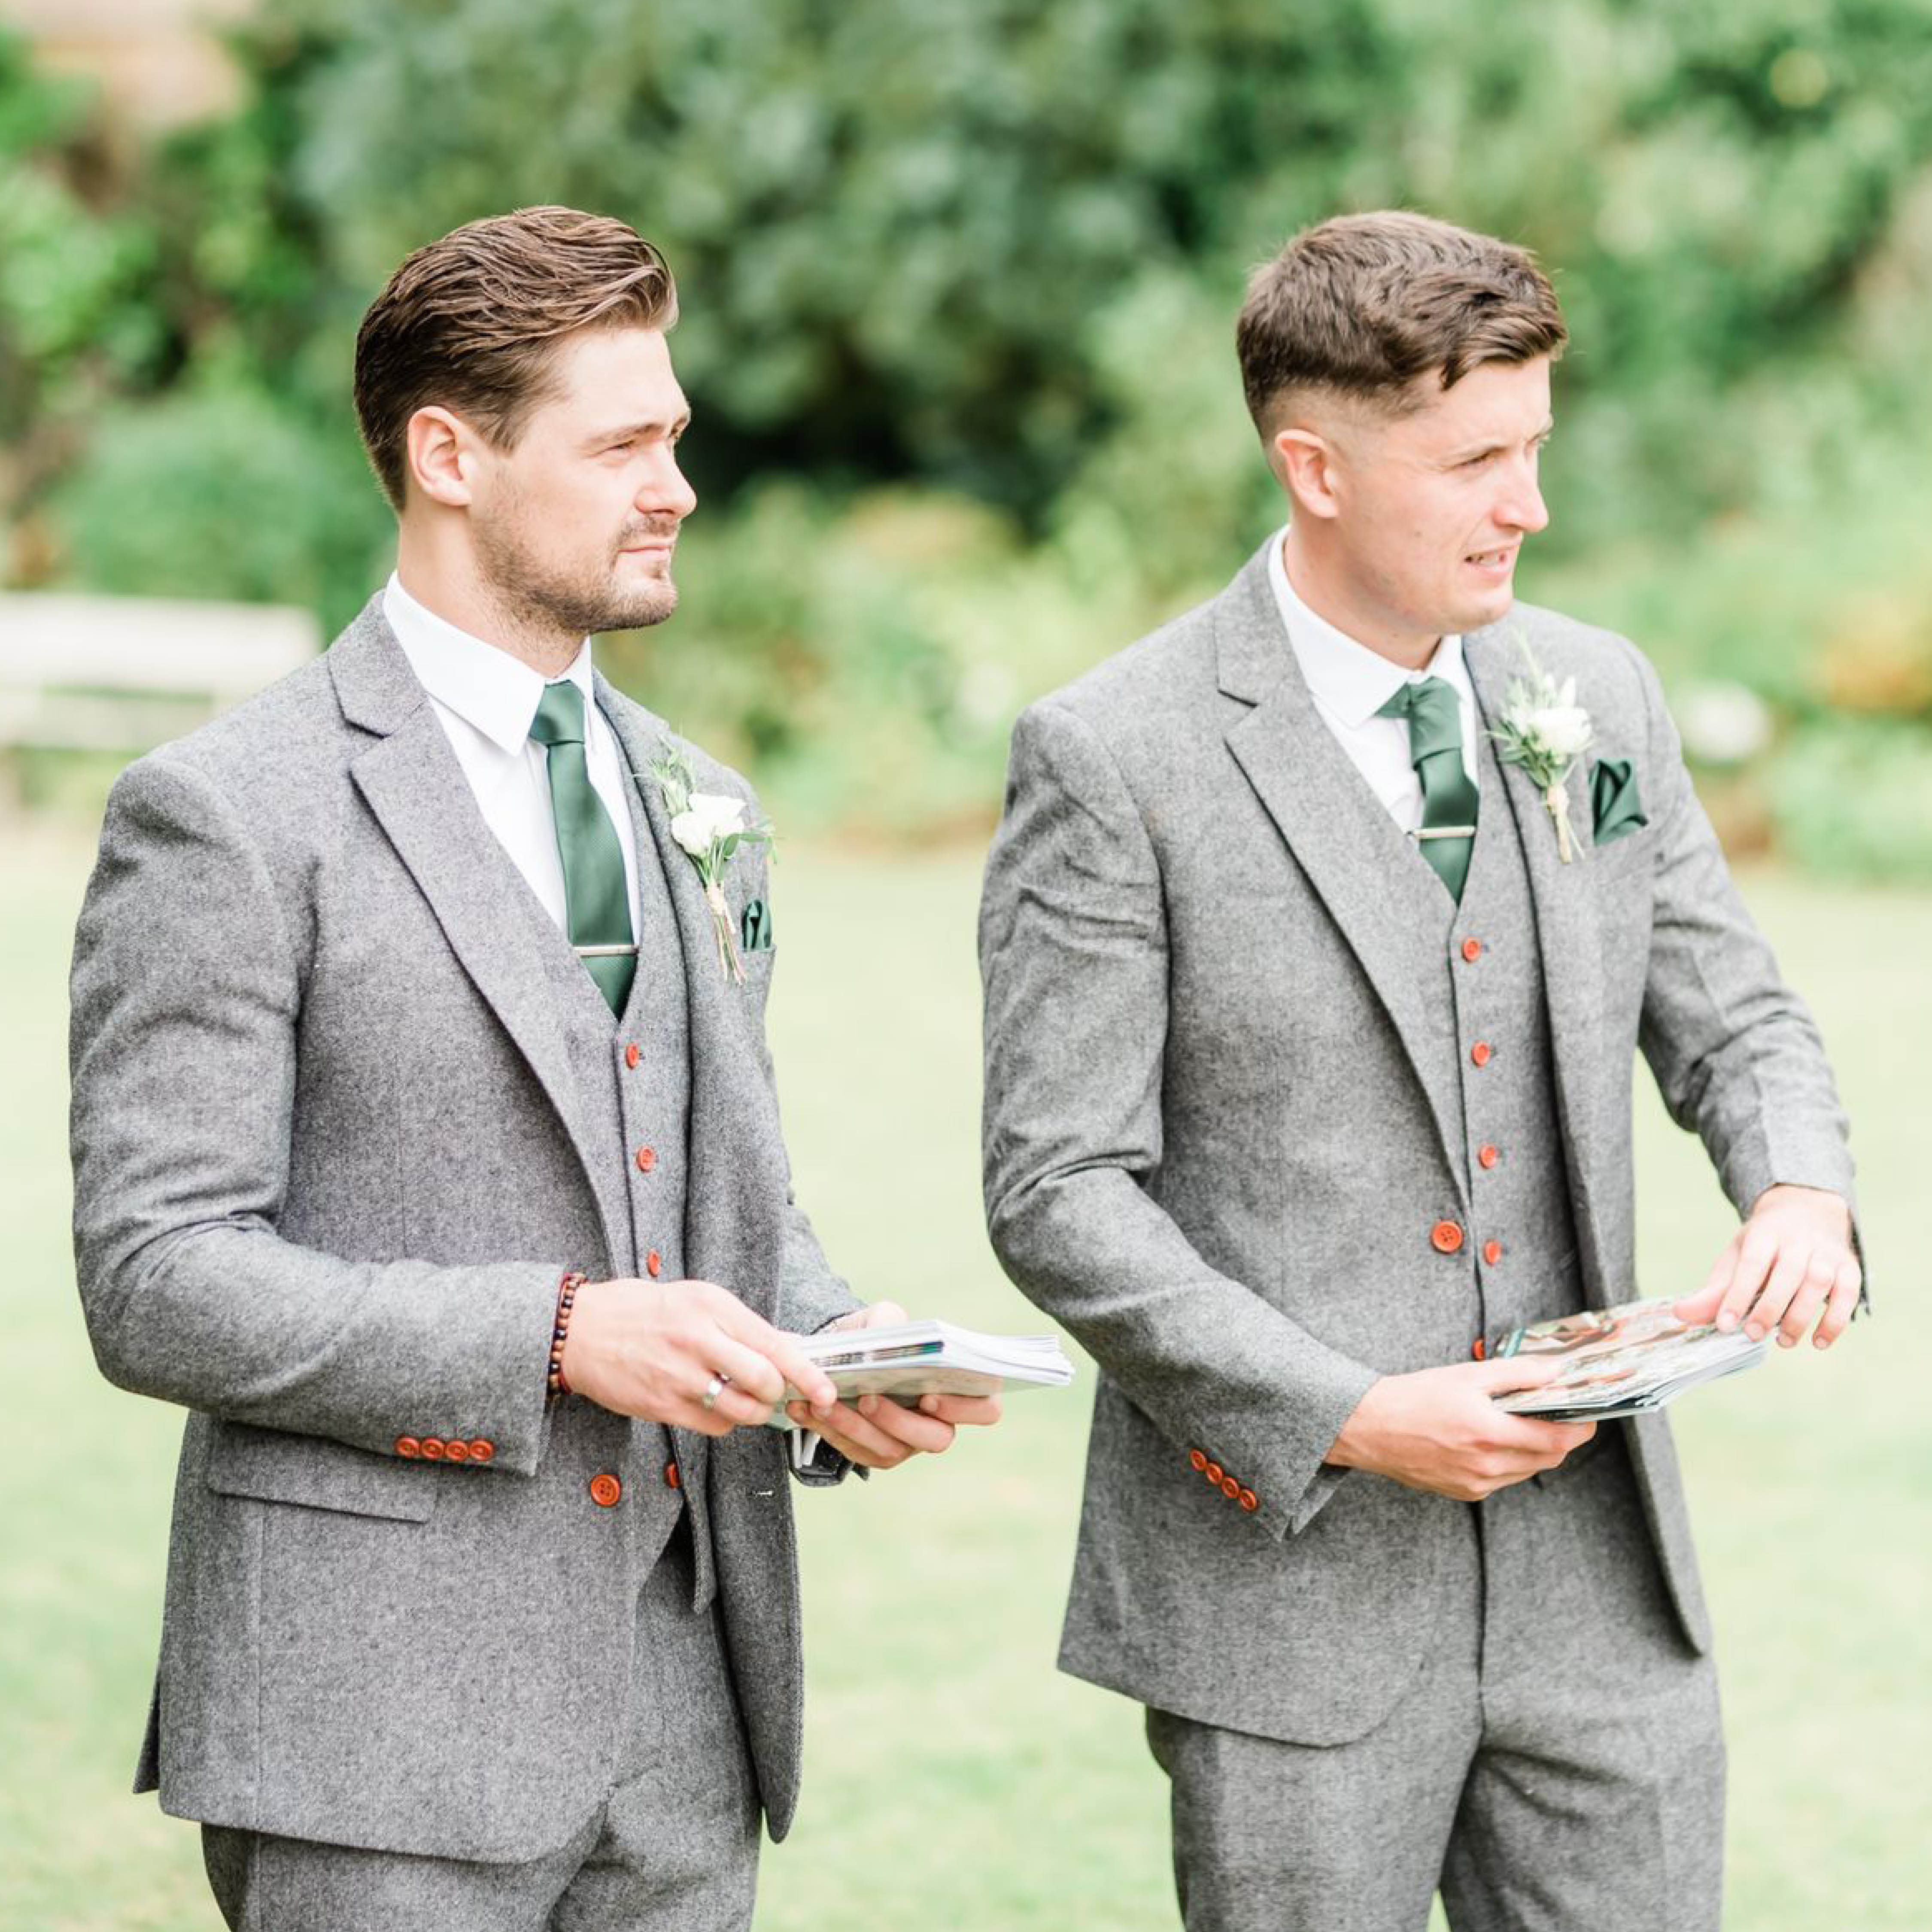 How to pick the perfect groomsmen for your wedding, wedding reception